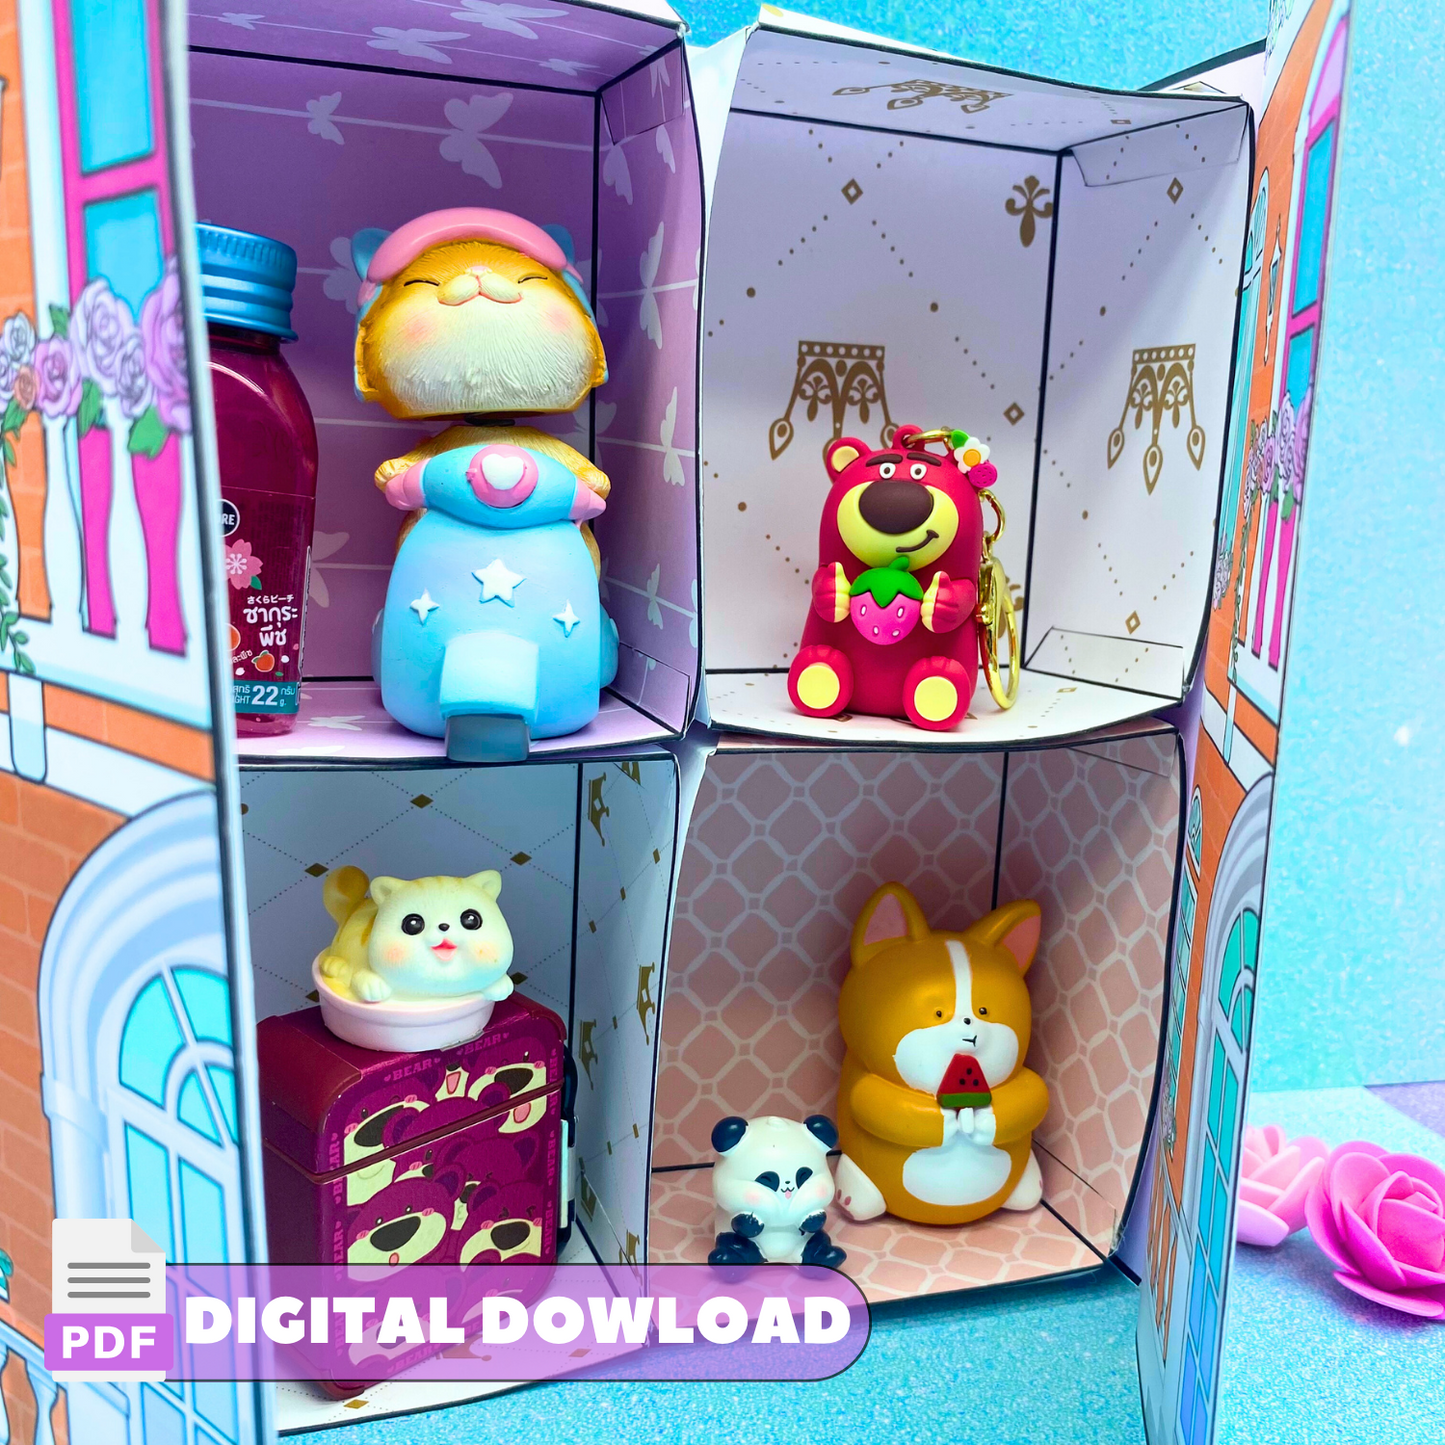 Vintage Royal Doll House Box - Build 3D Printable Dollhouse Kit 🌈 Pop Up House | Printable Toys | A4 DIY | Crafting | Instant Download 🌈 Woa Doll Crafts